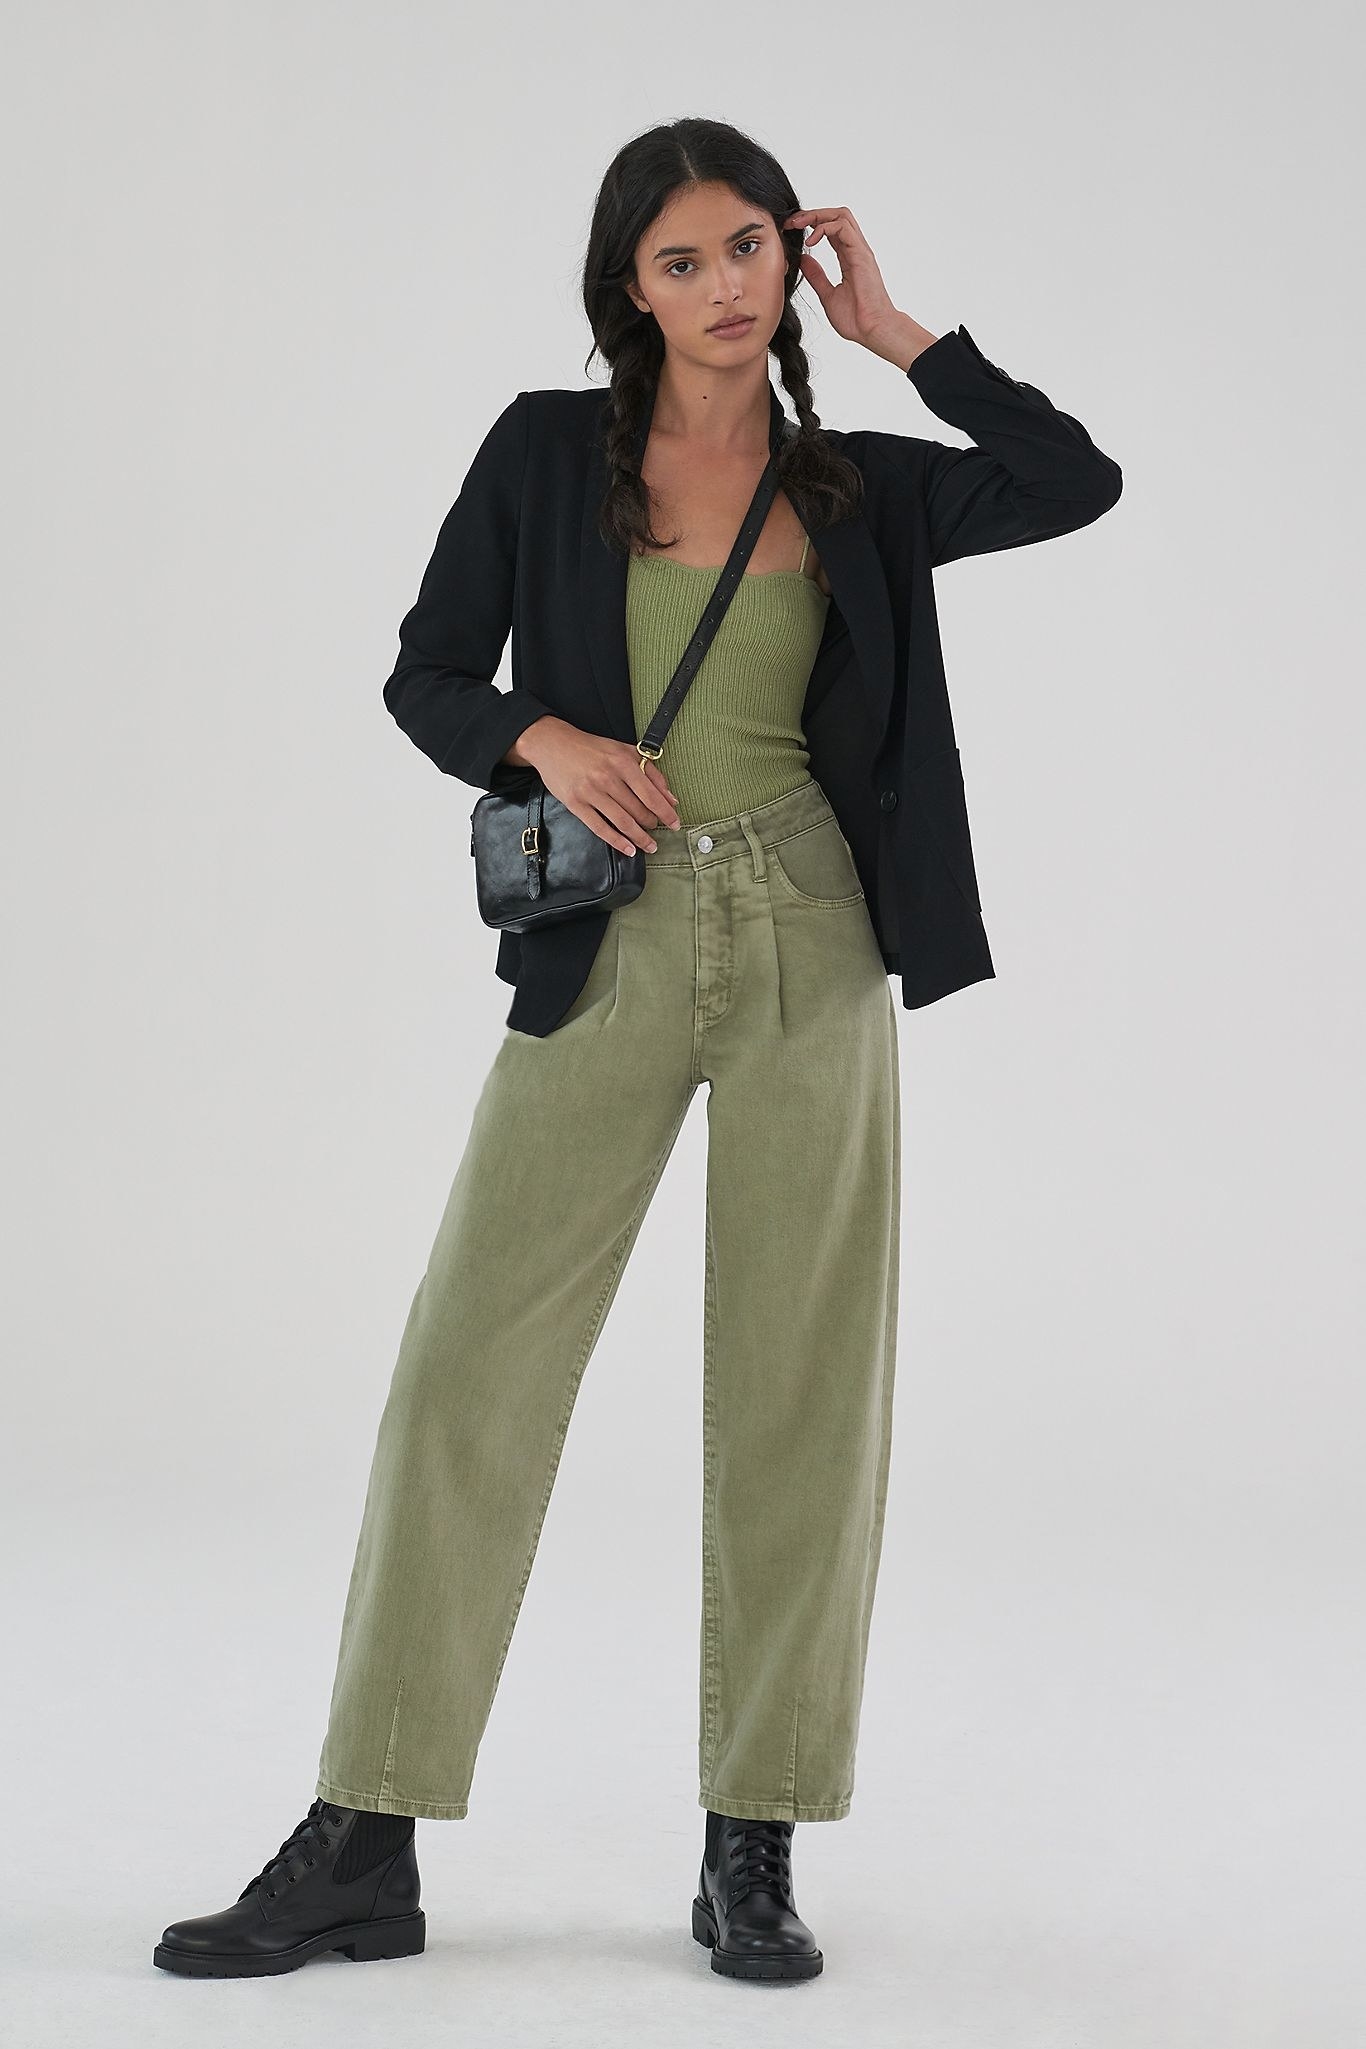 Model wearing relaxed fit high-rise green jeans with matching green tank and black blazer